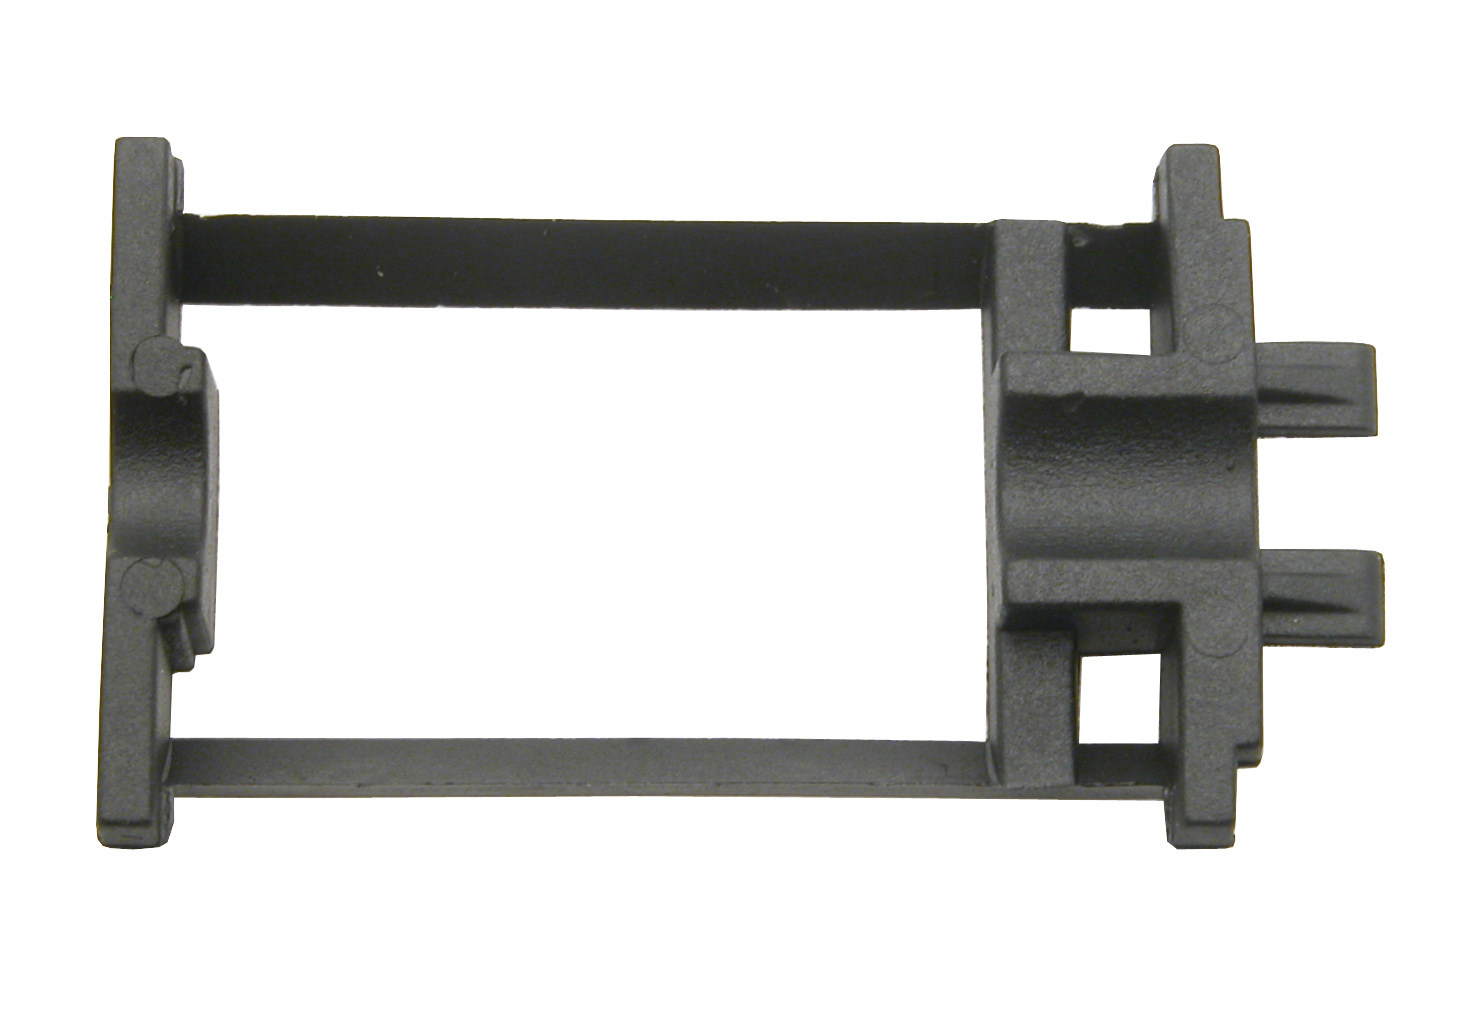 SC-6510 RT Motor mount Adapter for S-can closed motor. Rigid